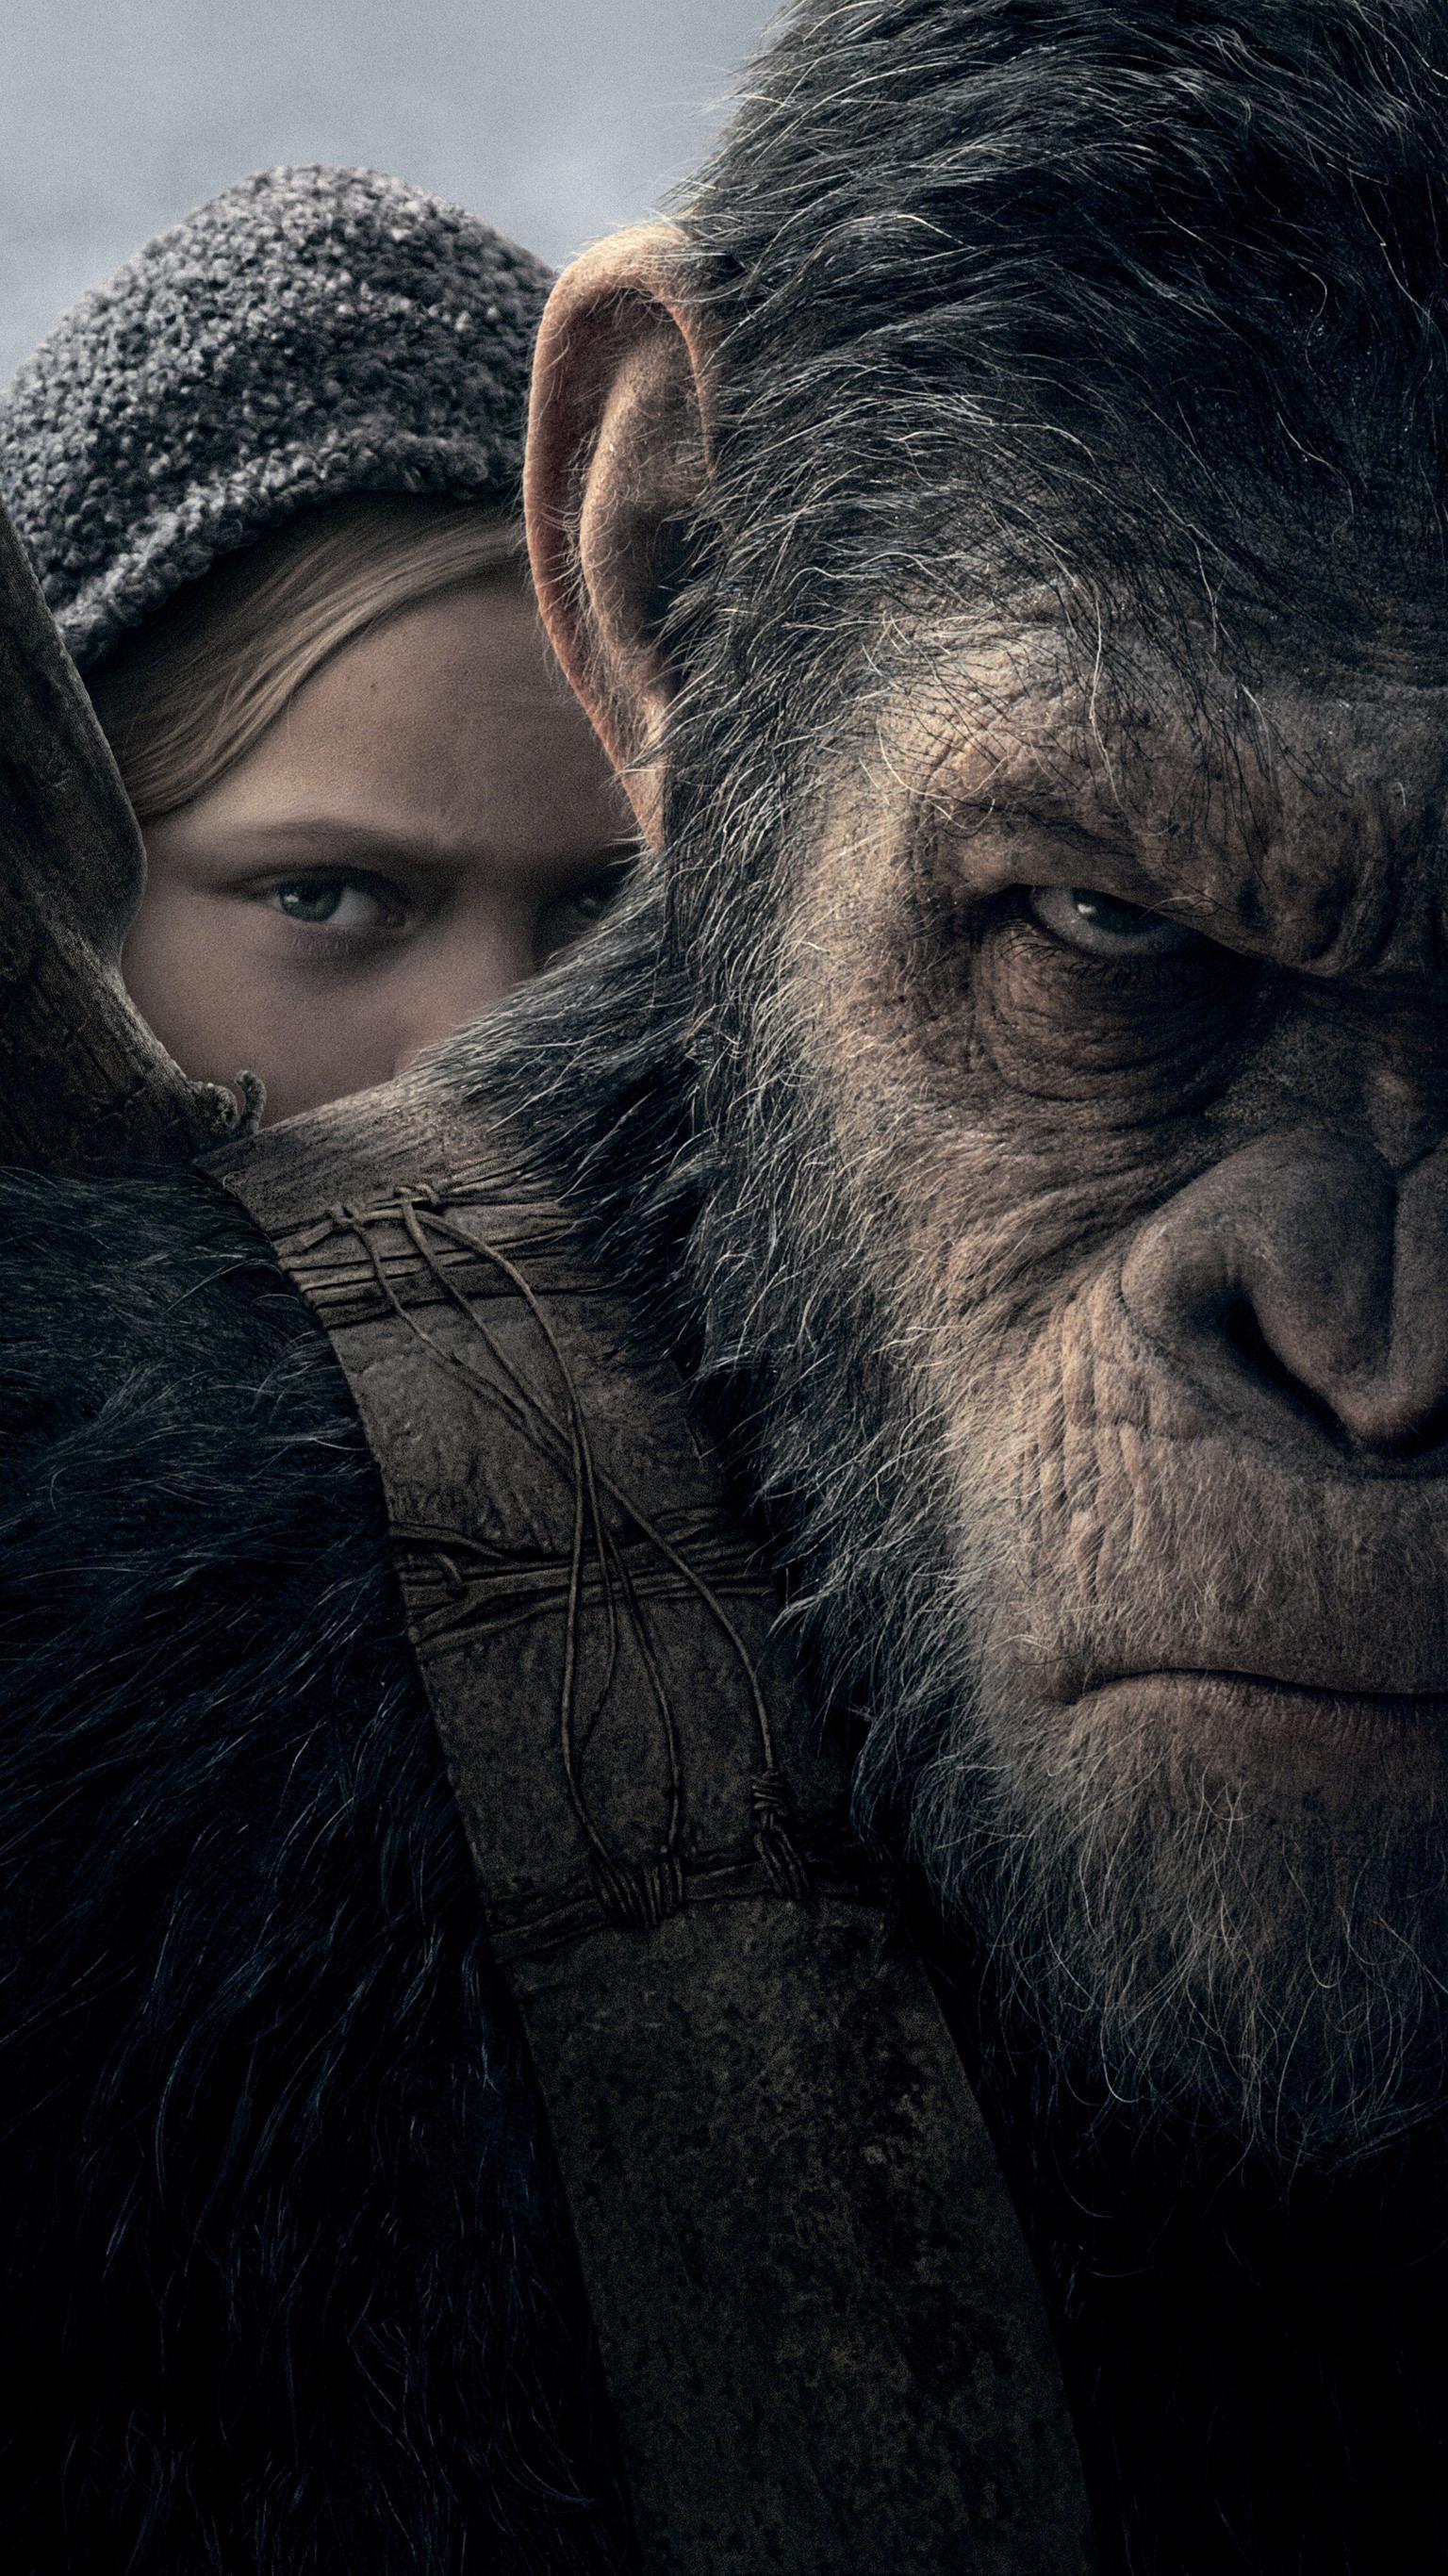 War for the Planet of the Apes (2017) Phone Wallpaper. apes